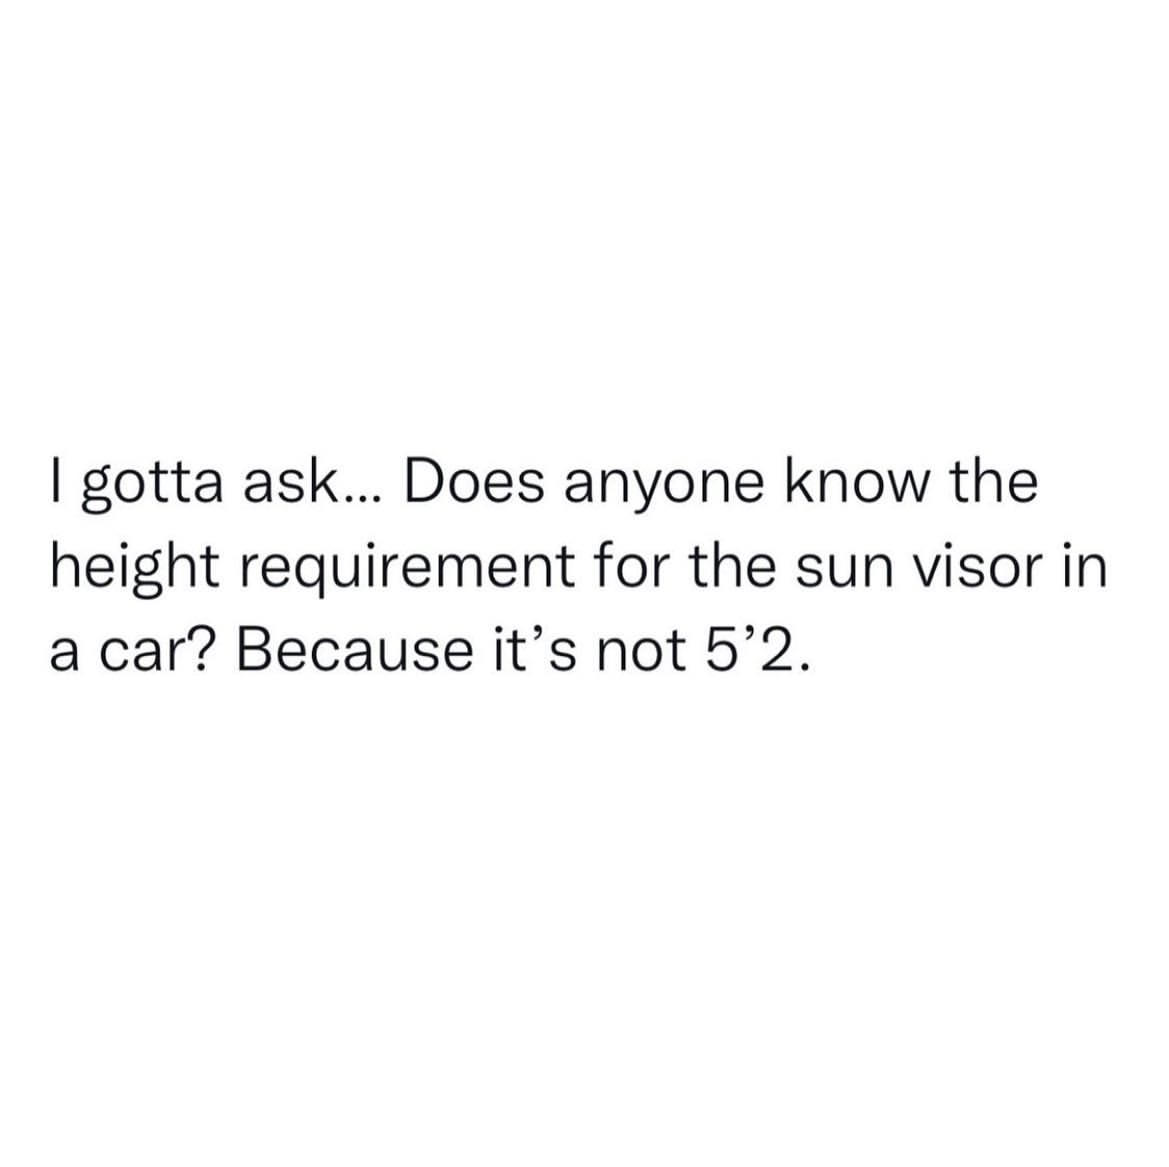 I gotta ask... Does anyone know the height requirement for the sun visor in a car? Because it's not 5'2.